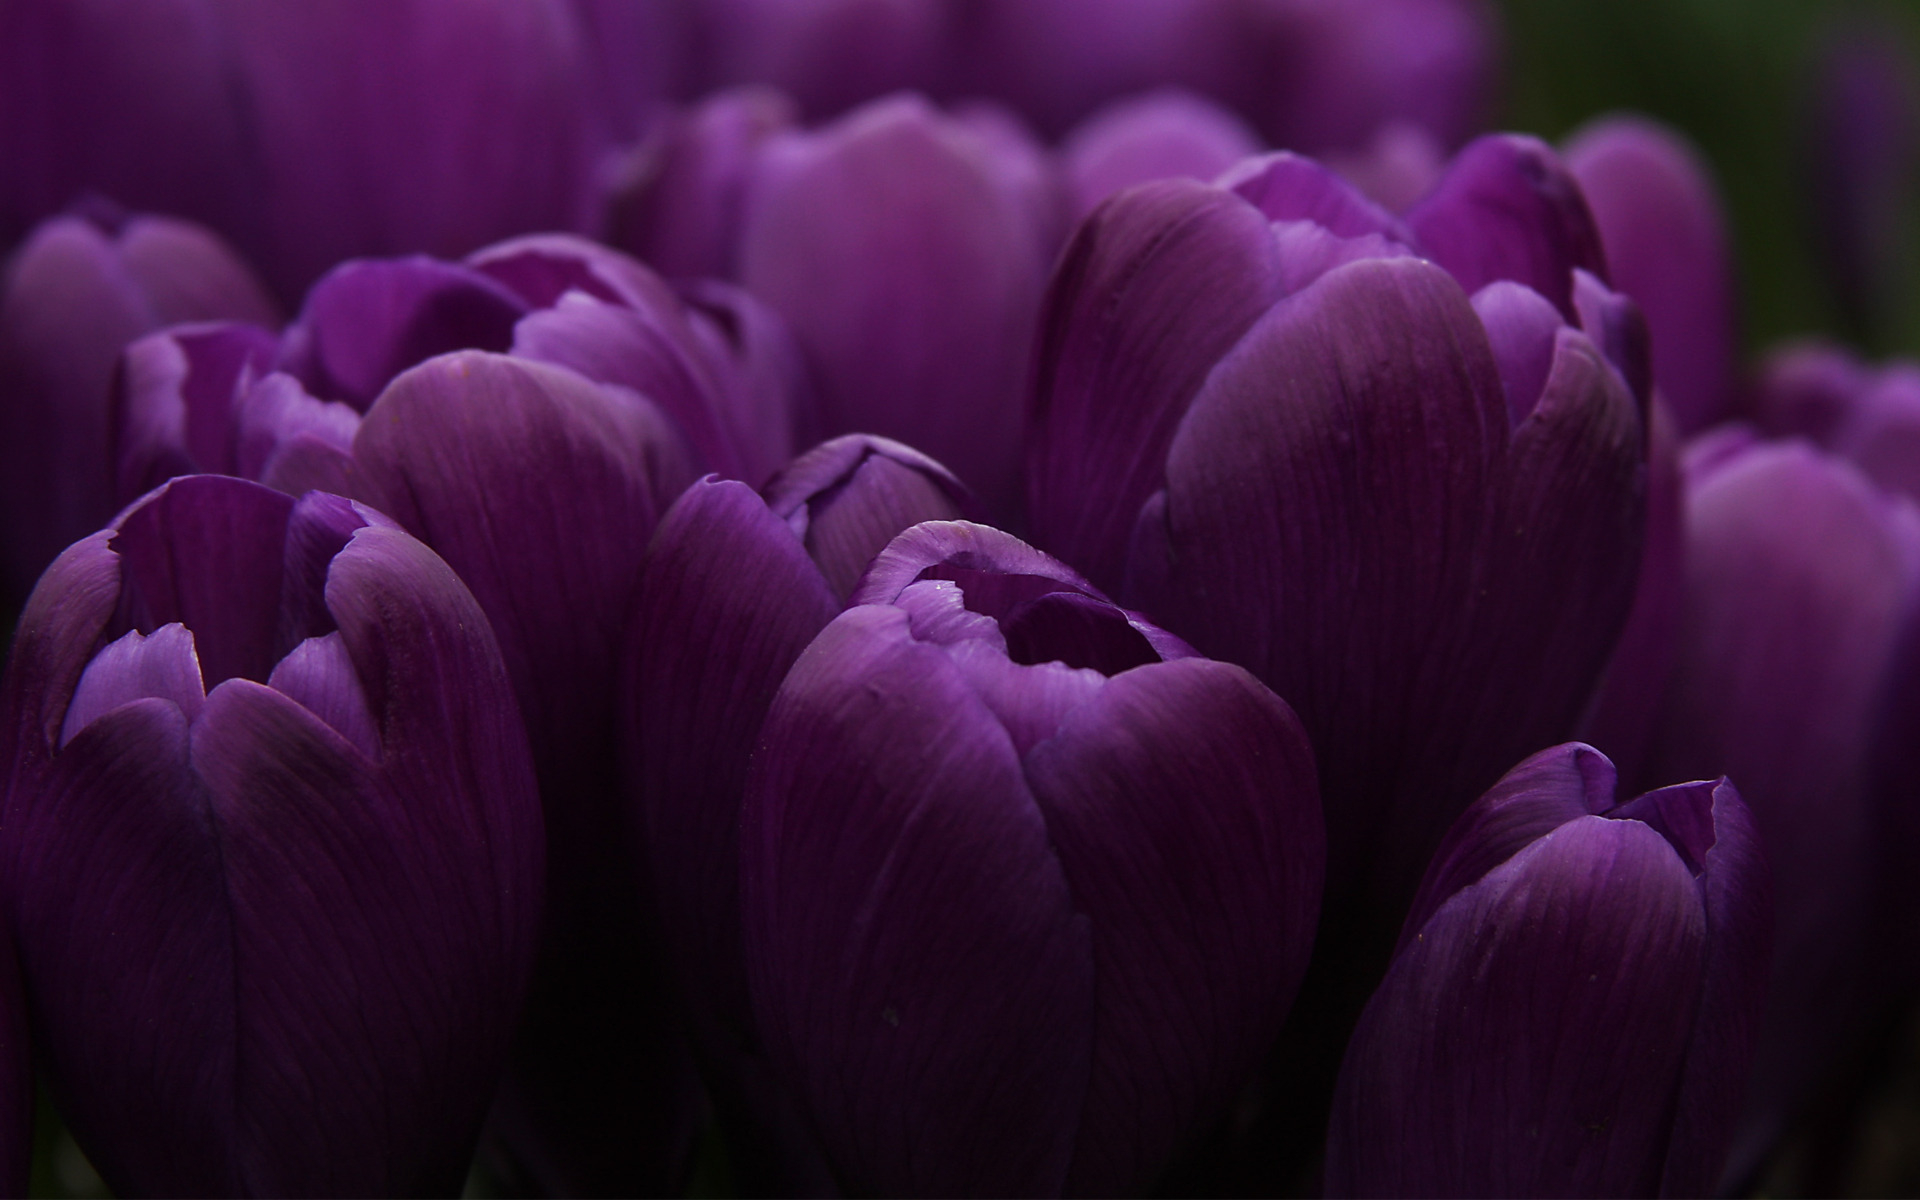 nature flowers purple tulips nicely garden images download